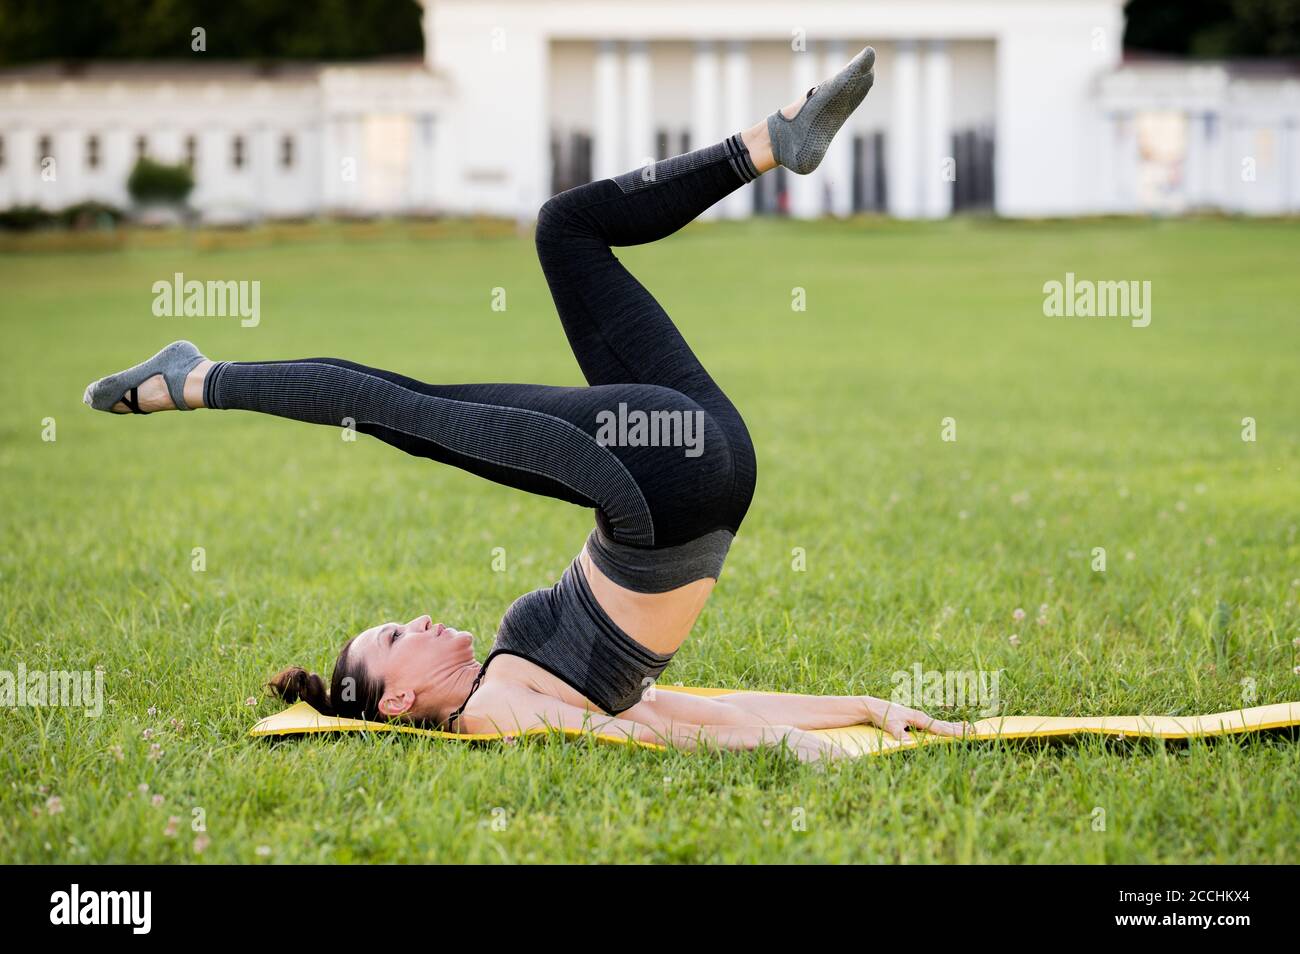 Beautiful young woman lying on a yellow mattress pose while wearing a  tight sports outfit in the park doing pilates or yoga bicycle exercises  Stock Photo  Alamy